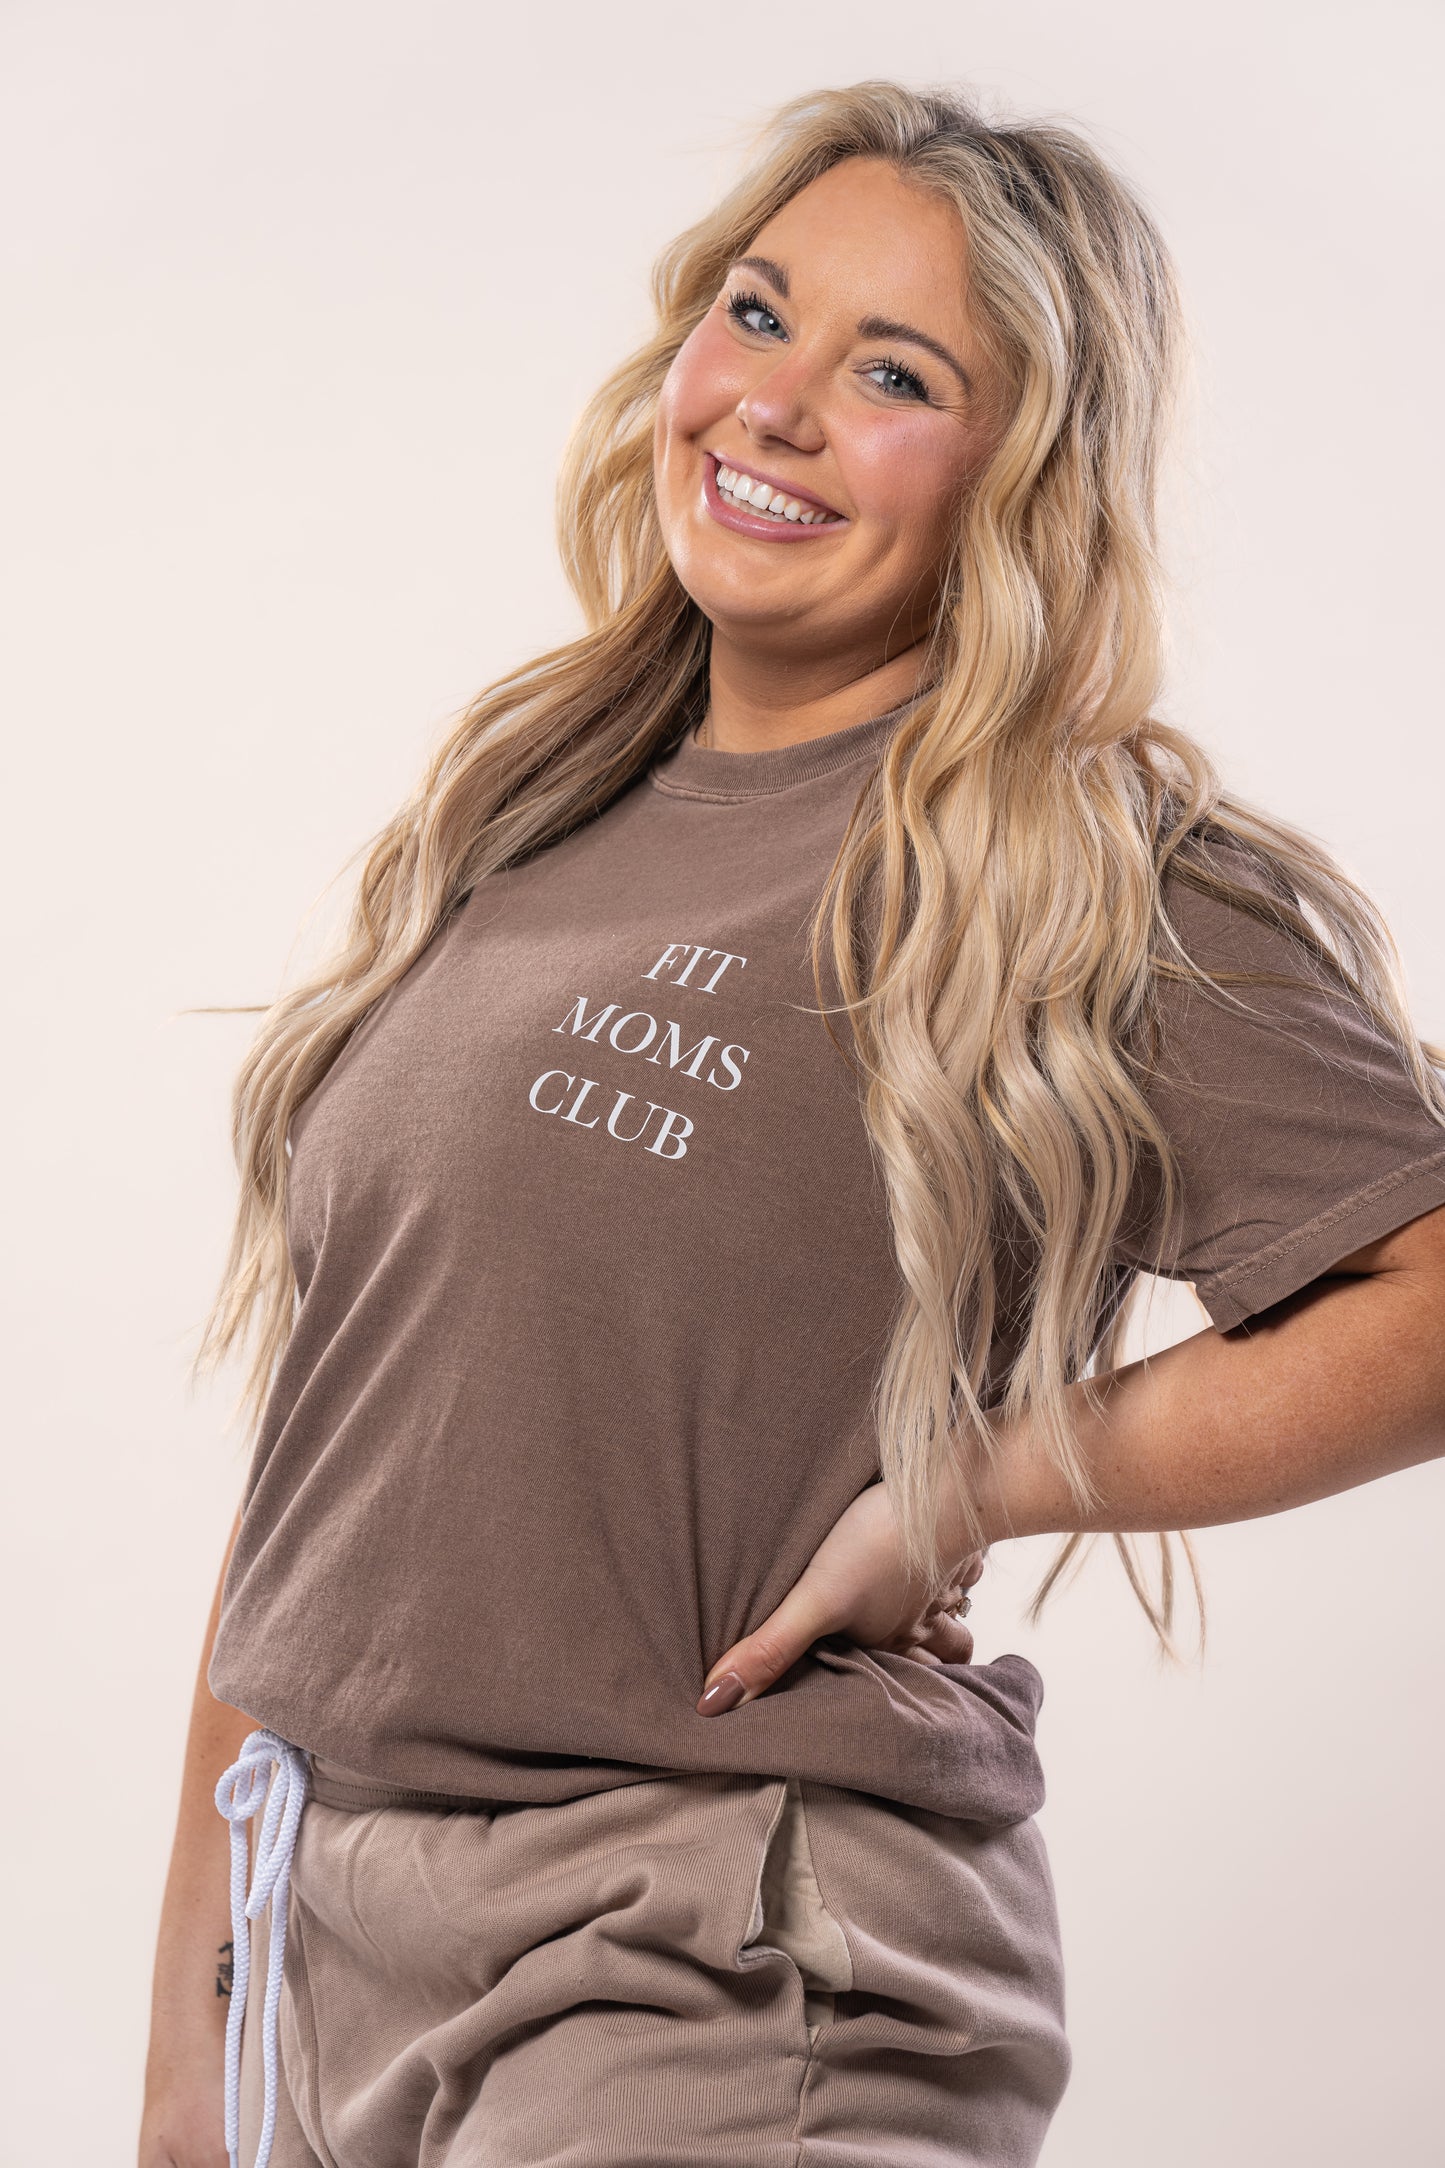 Fit Moms Club (Front, Back) - Tee (Espresso)